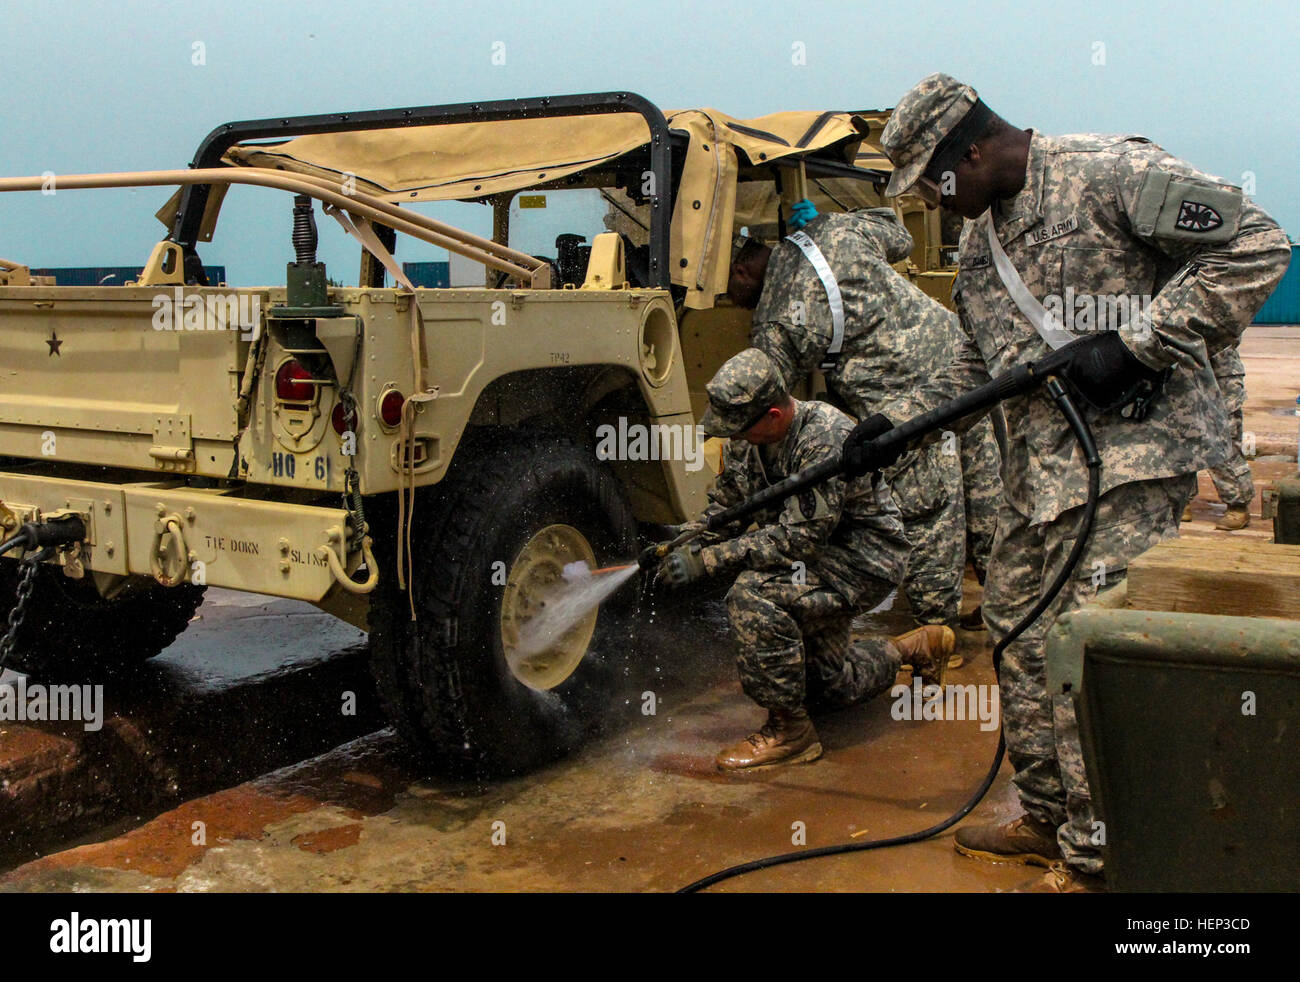 Staff Sgt. Terrance Daniels, right, sprays down a vehicle with a pressure washer while Spc. Kolton Price, center, native of Winfield, Kan., and Sgt. Andrea Jackson, left, native of Houston, scrub and clean a vehicle at the United States Department of Agriculture inspection point, Camp Buchanan, Liberia, Jan. 23, 2015. All Soldiers are part of the 53rd Movement Control Battalion, 101st Sustainment Brigade, deployed as Task Force Lifeliner in support of Joint Forces Command – United Assistance, who help operate the USDA inspection point, ensuring all vehicles and equipment headed back to the U.S Stock Photo